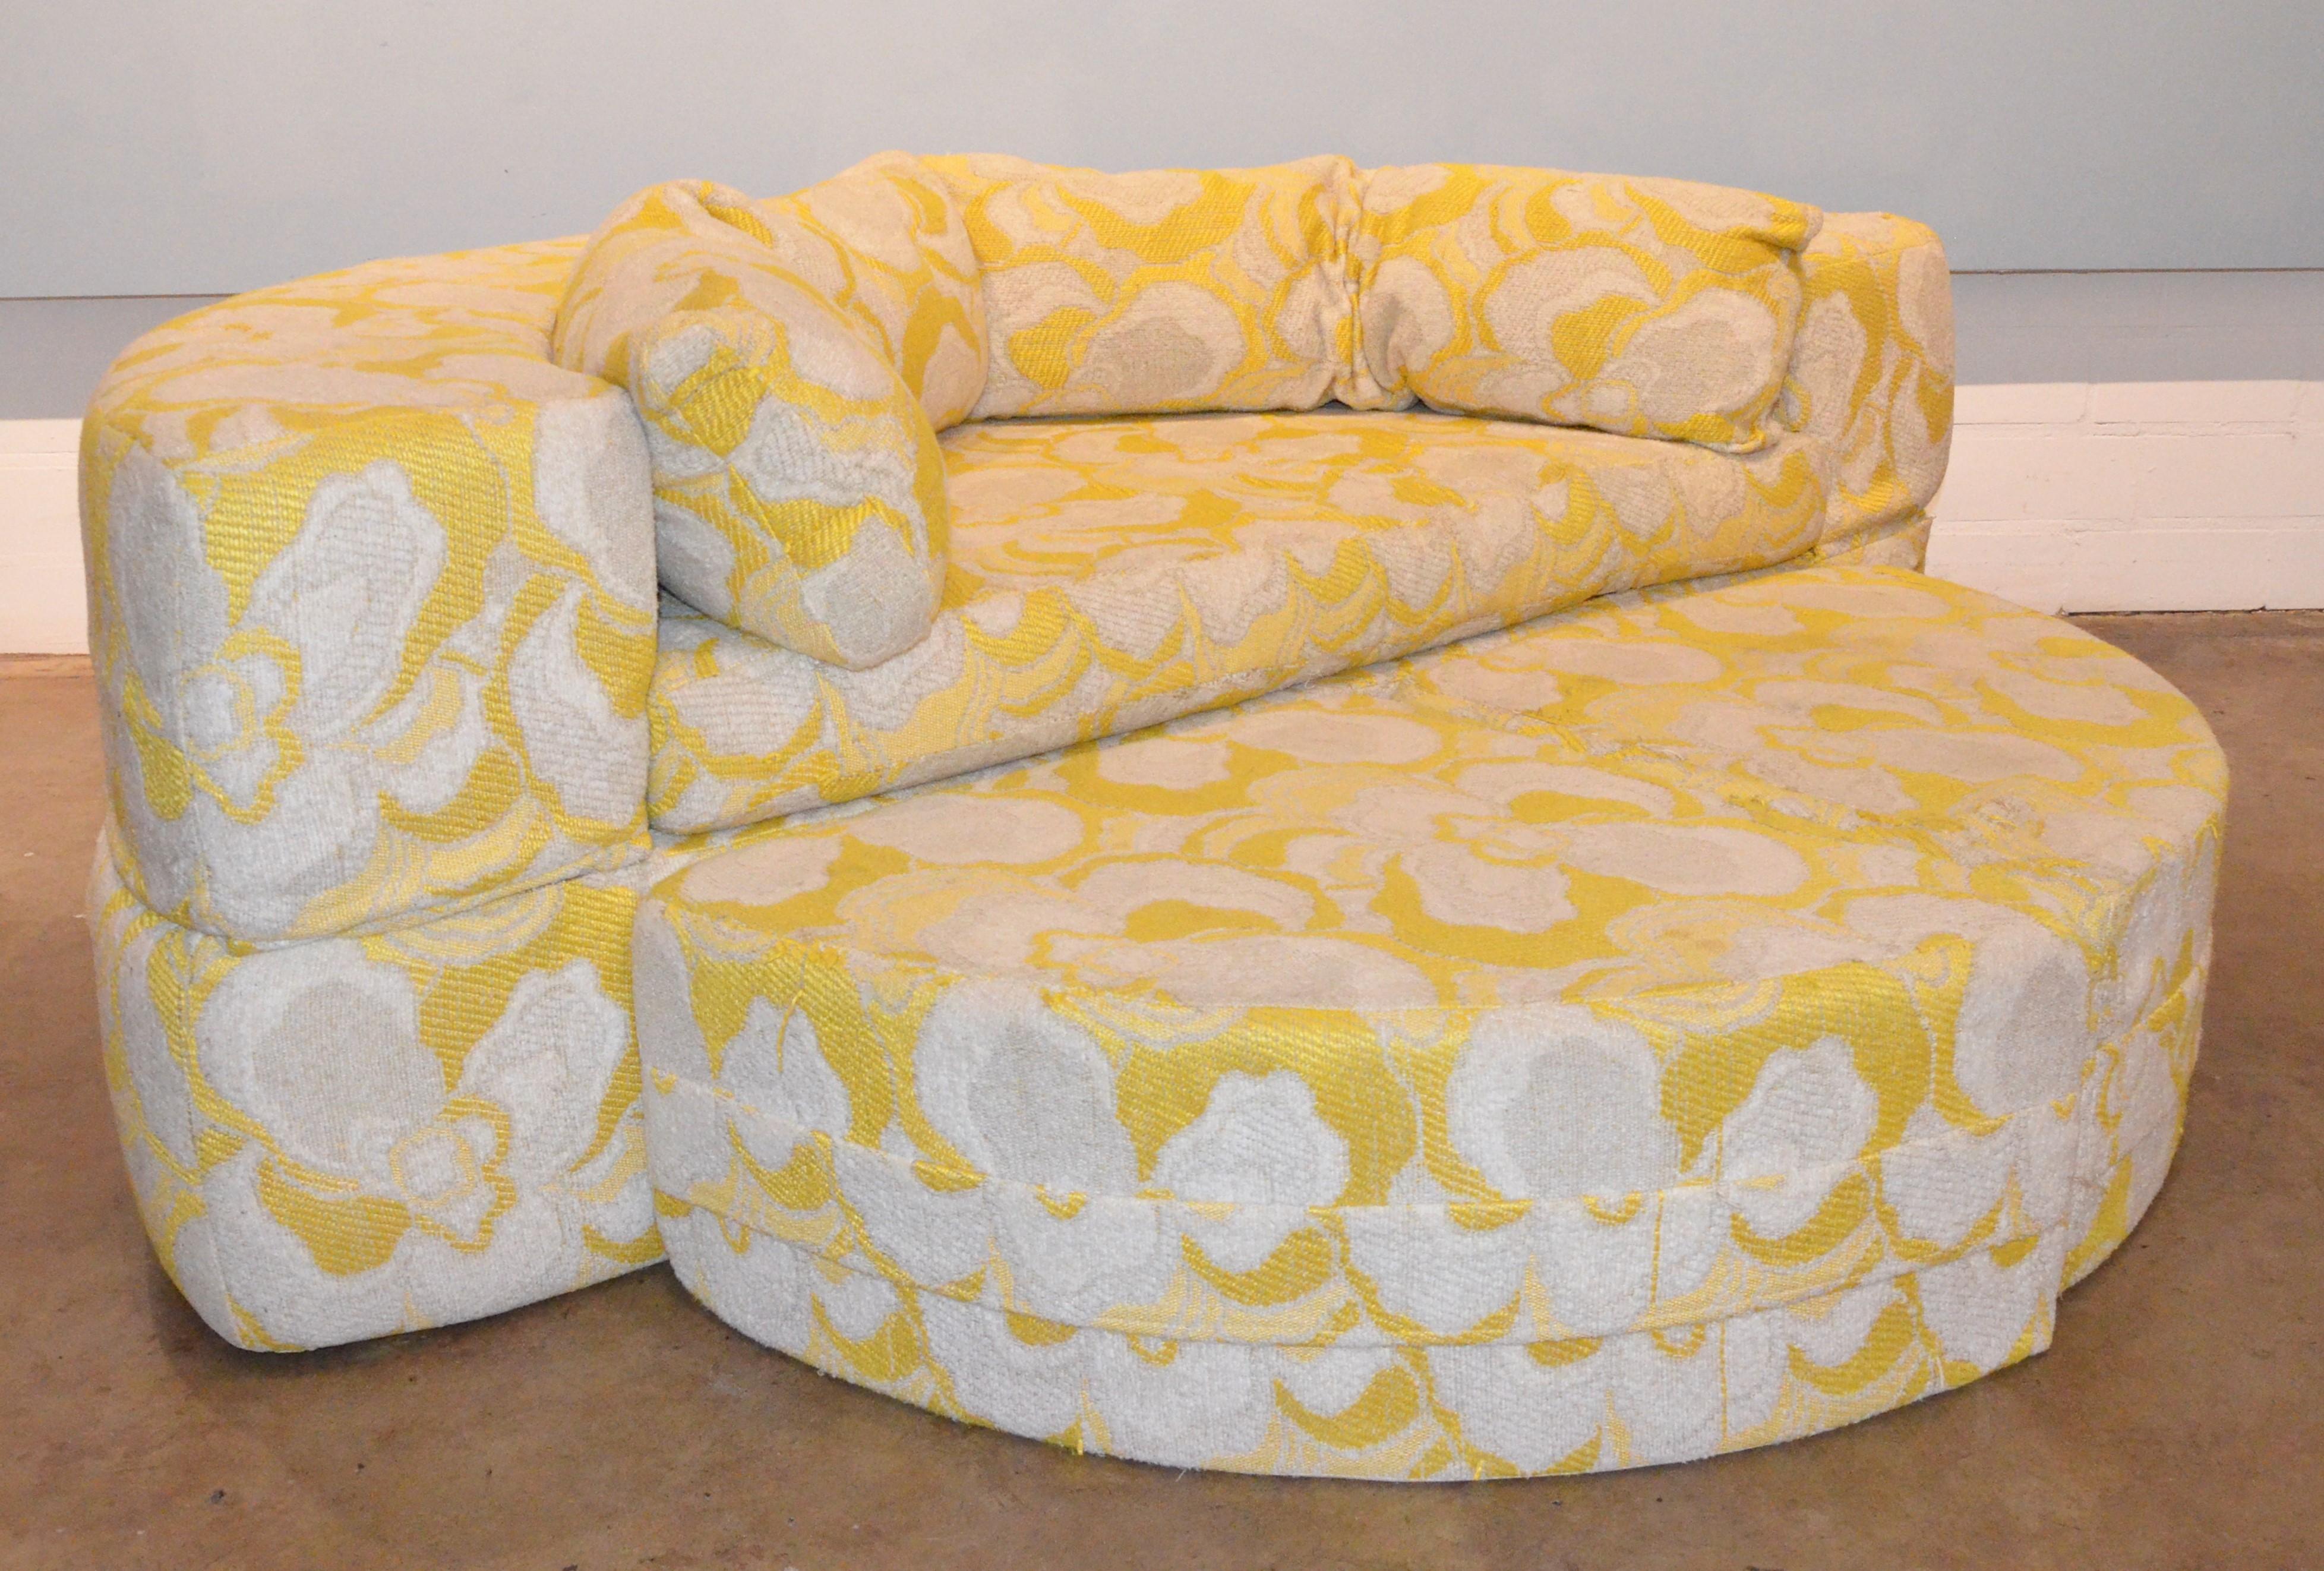 20th Century Mid-Century Modern Upholstered Round Sleeper Sofa/ Chaise/ Lounger with Bolsters